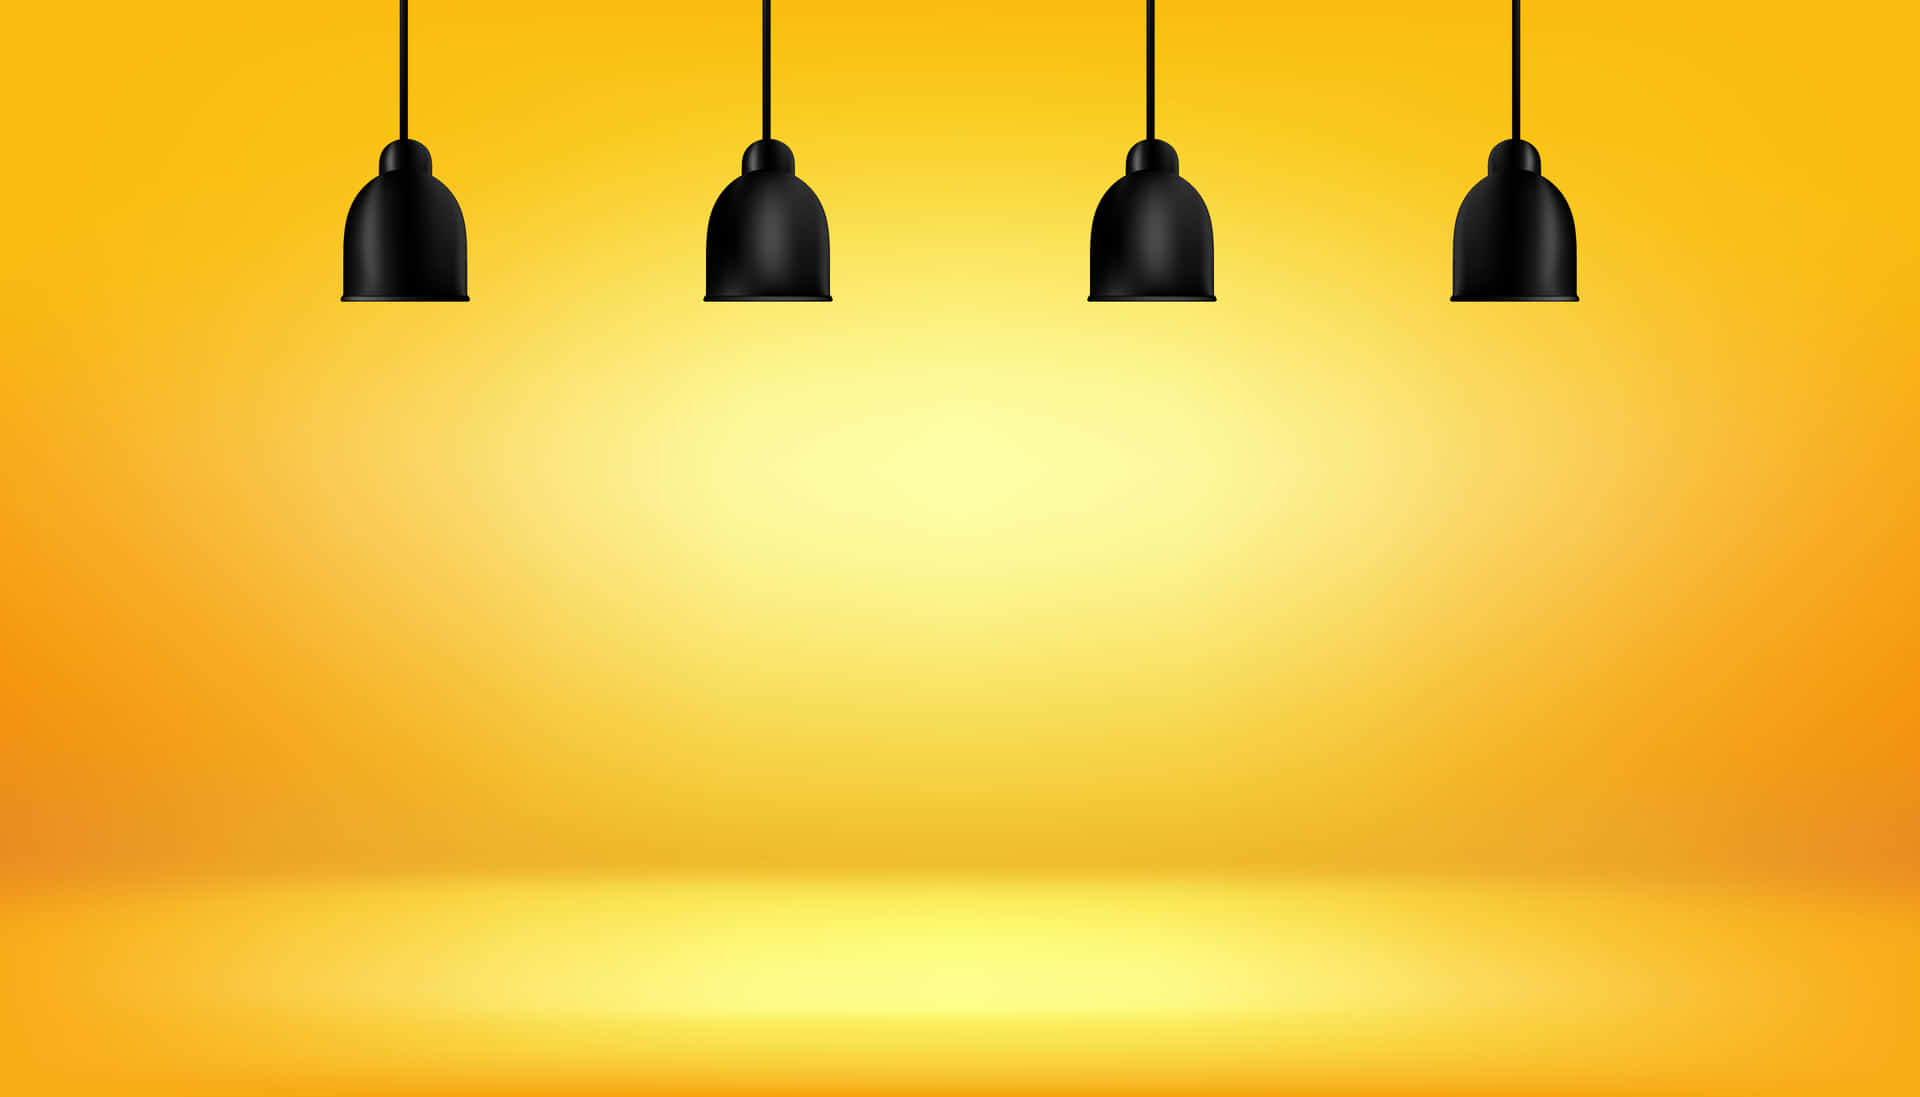 Four Black Lamps Hanging On An Orange Background